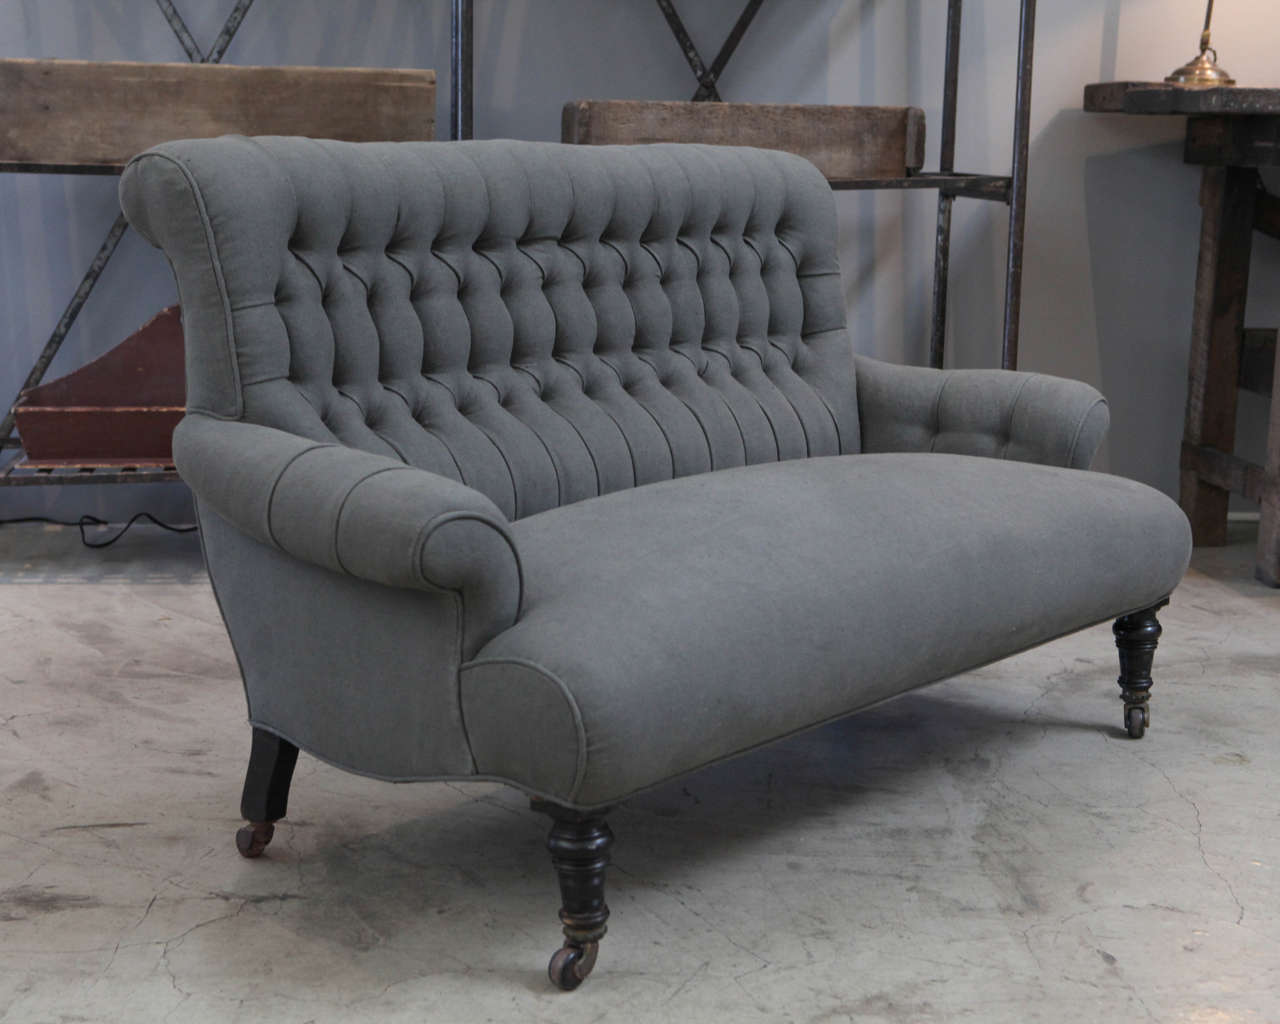 a handsome settee newly upholstered in dark gray linen with it's original frame and wooden wheel feet.